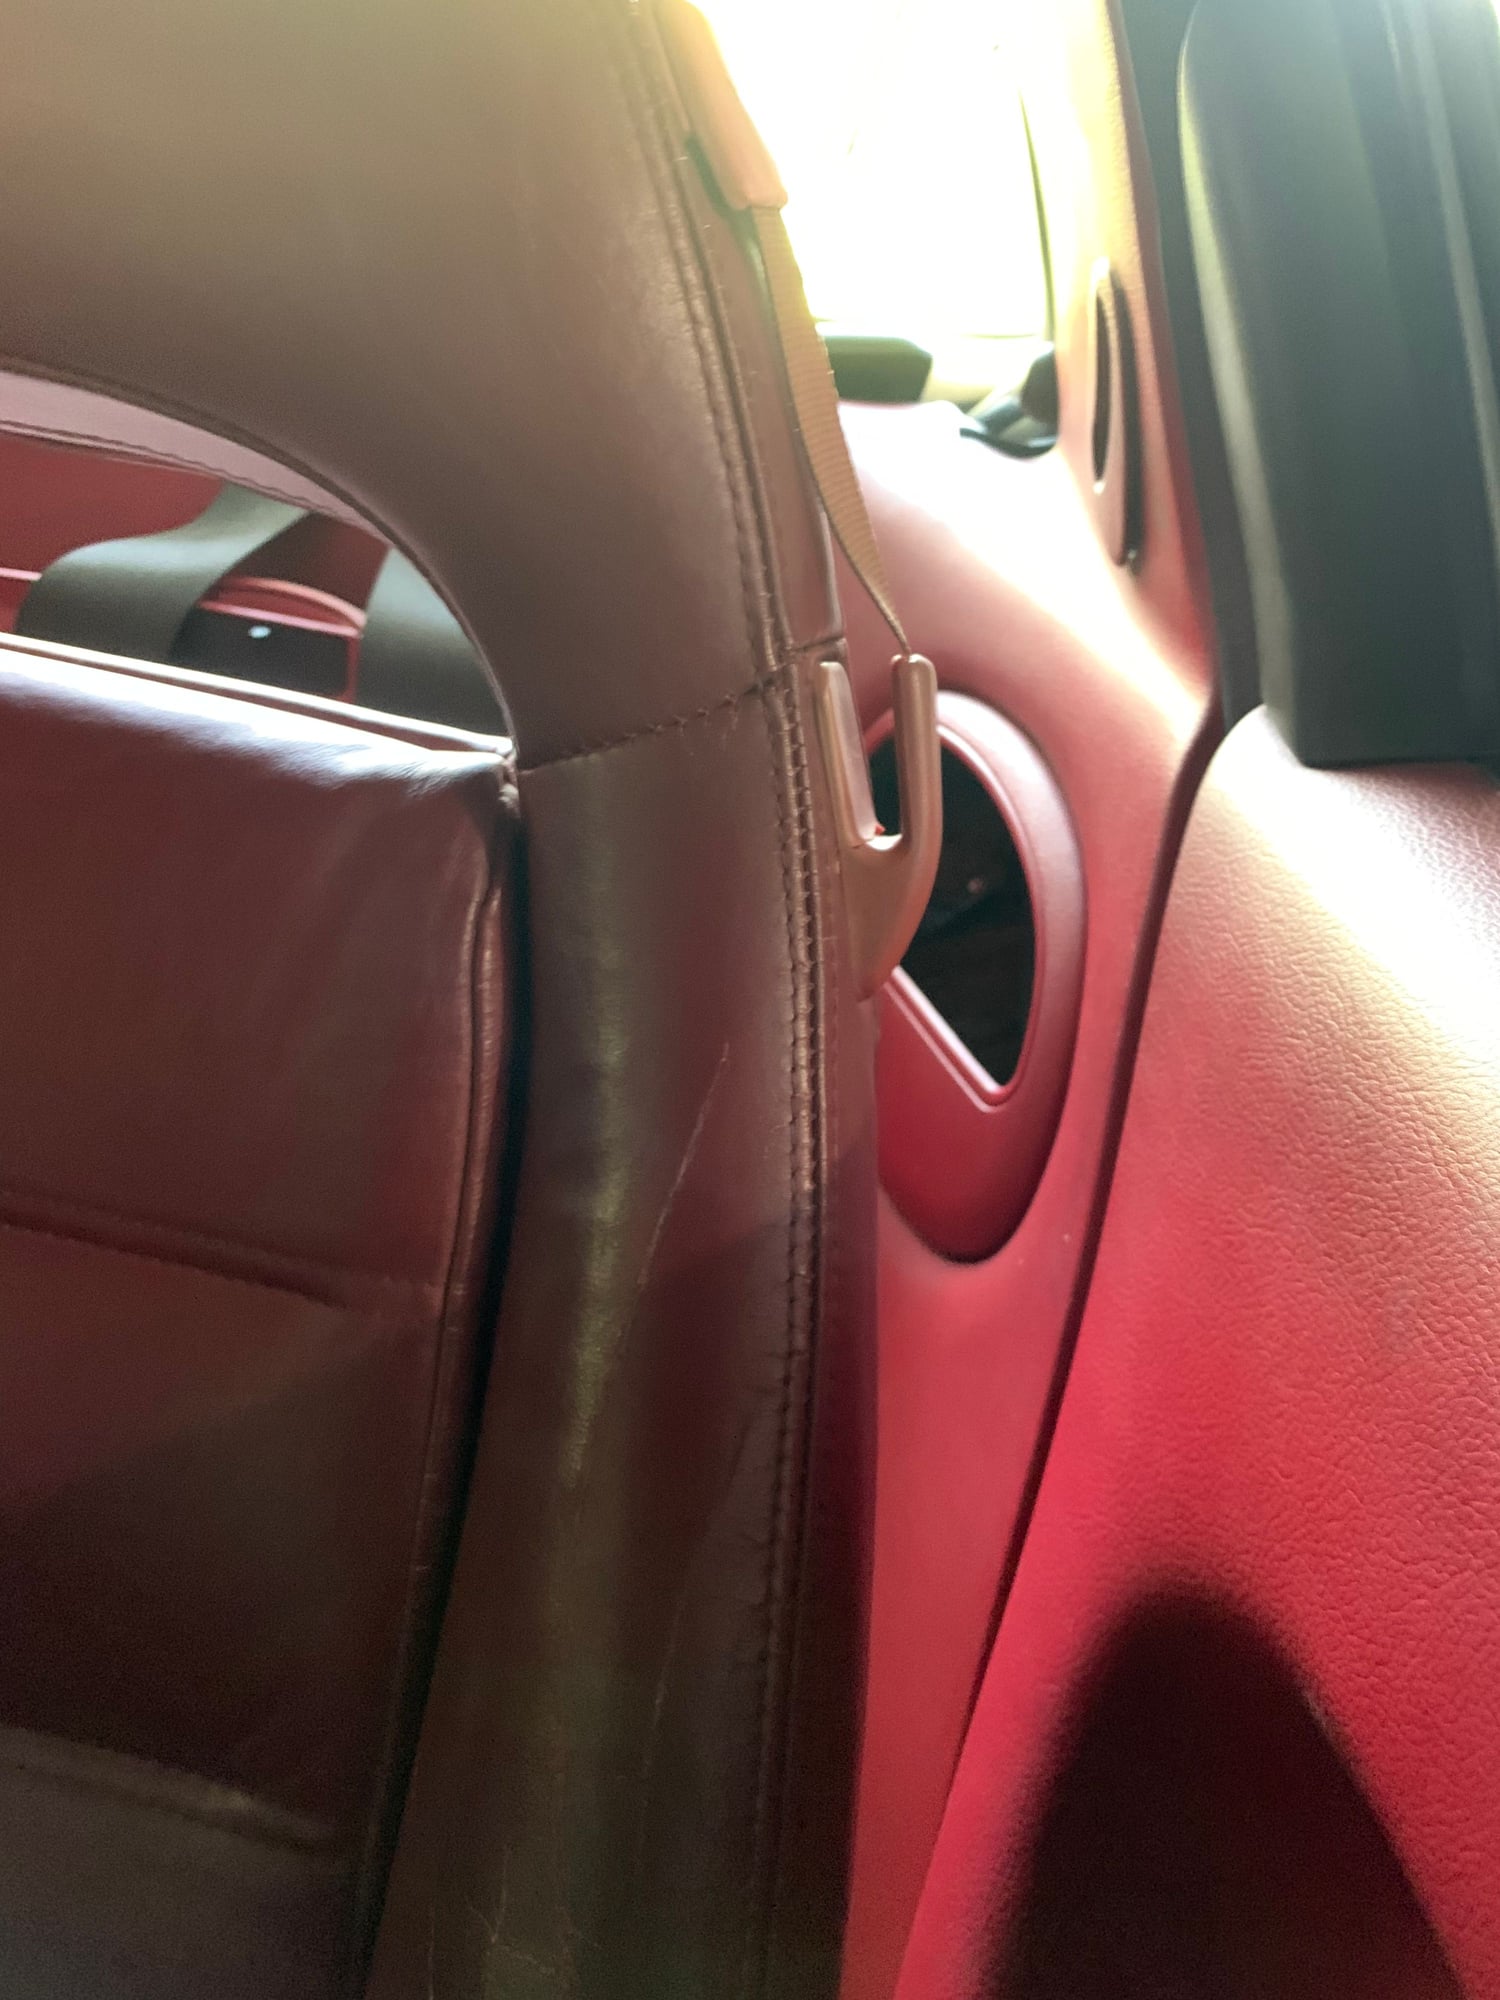 Accessories - WTB: set of FD Red interior seat belt assembly and set of Red Leather Seats - Used - 1993 to 1995 Mazda RX-7 - Allentown, PA 18031, United States